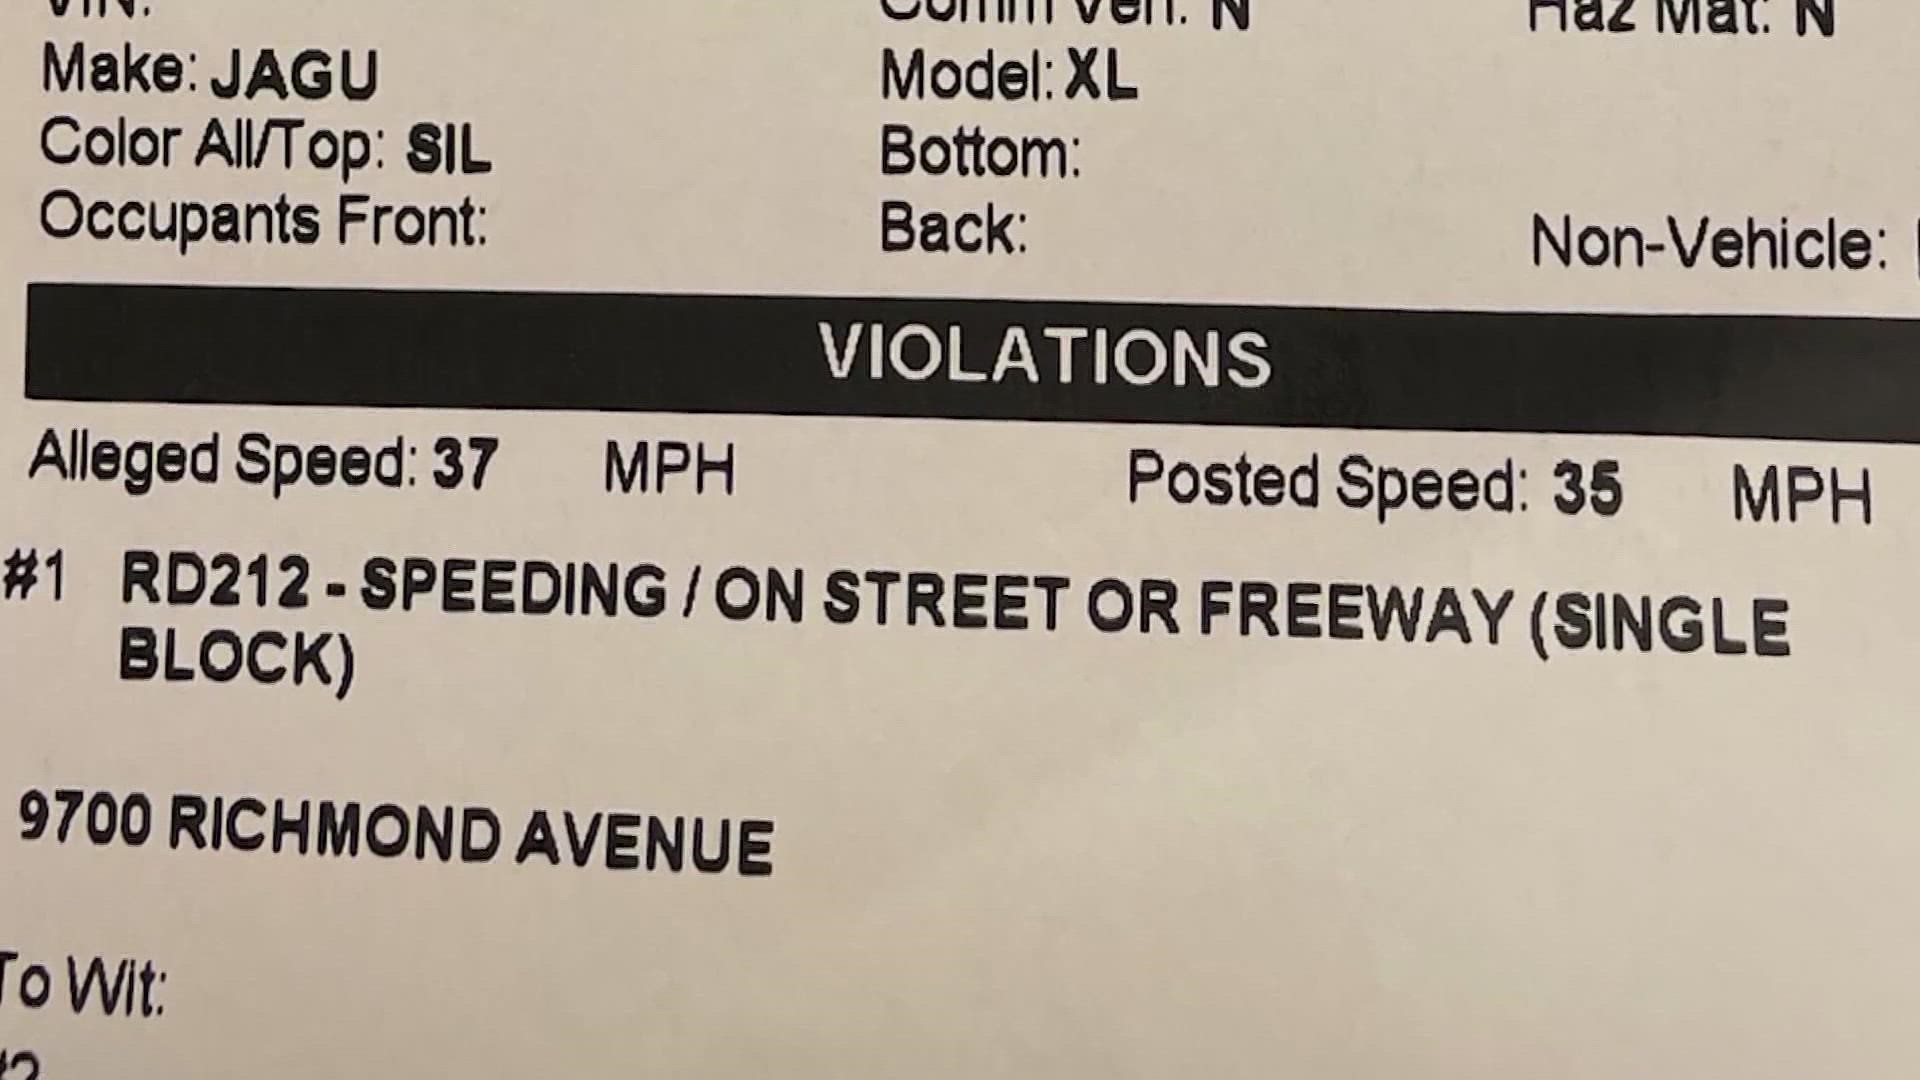 The 66-year-old had never been ticketed for speeding until earlier this week when she was clocked driving 37 mph in a 35 mph area along Richmond Avenue.